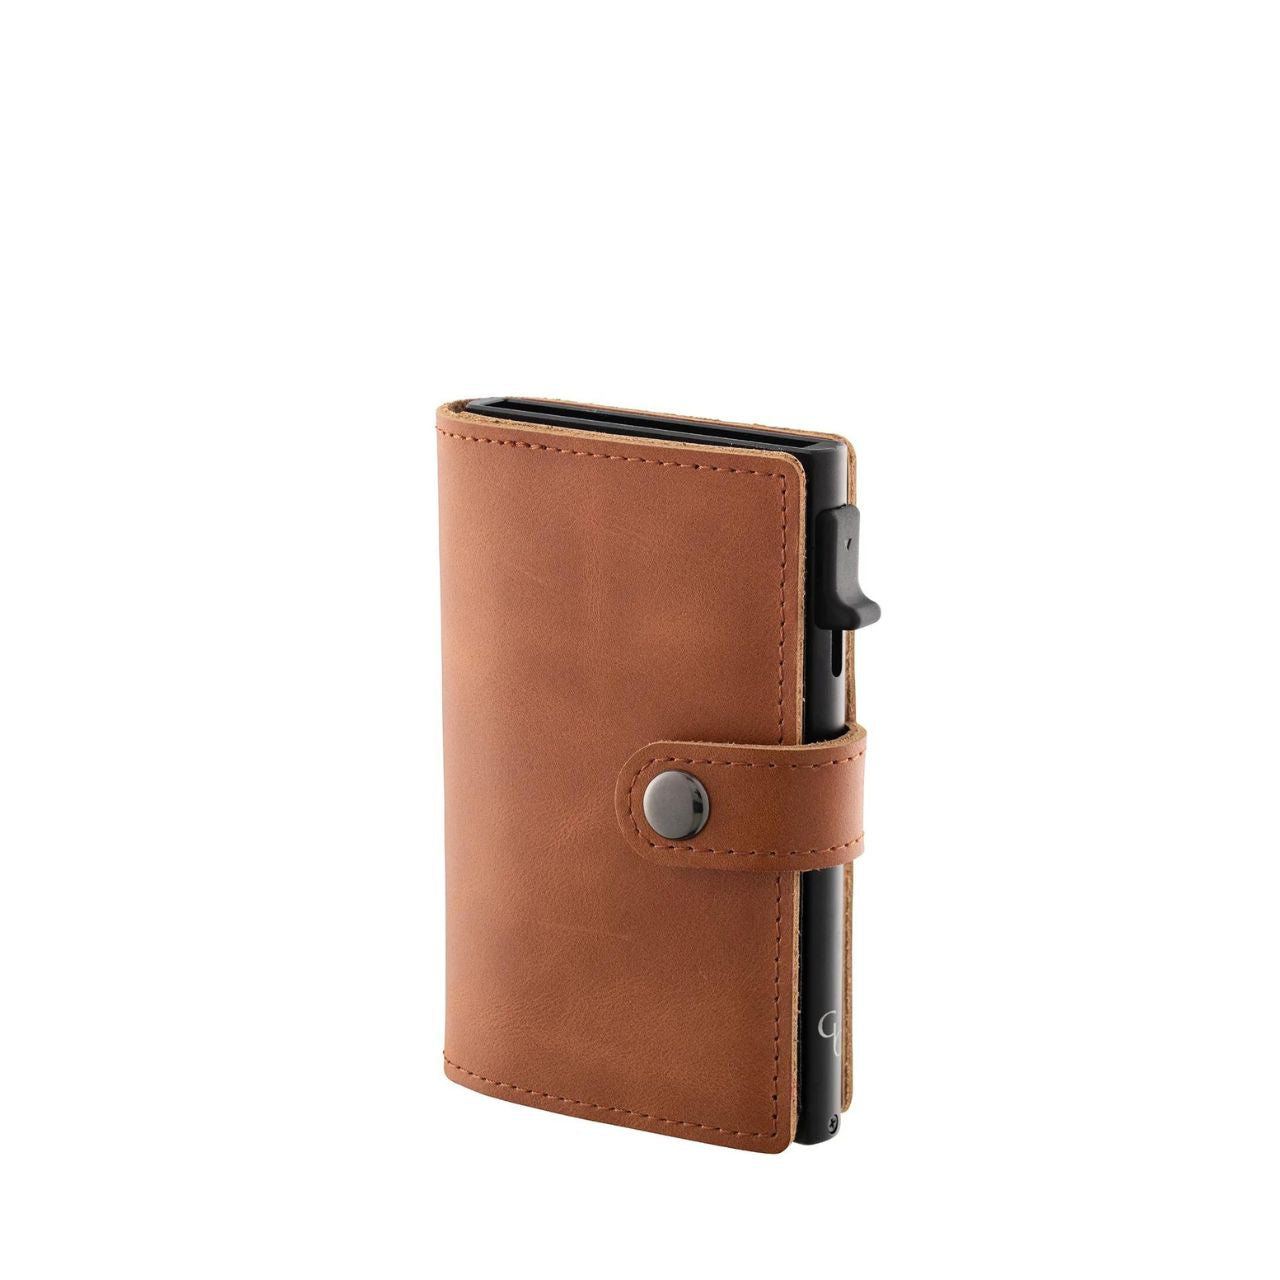 Brown Leather Card Holder Wallet  Keep your cards secure and organised with our Brown Leather Card Holder Wallet. Its compact size fits snugly in your pocket, while the luxurious leather exterior adds a touch of sophistication to your style.